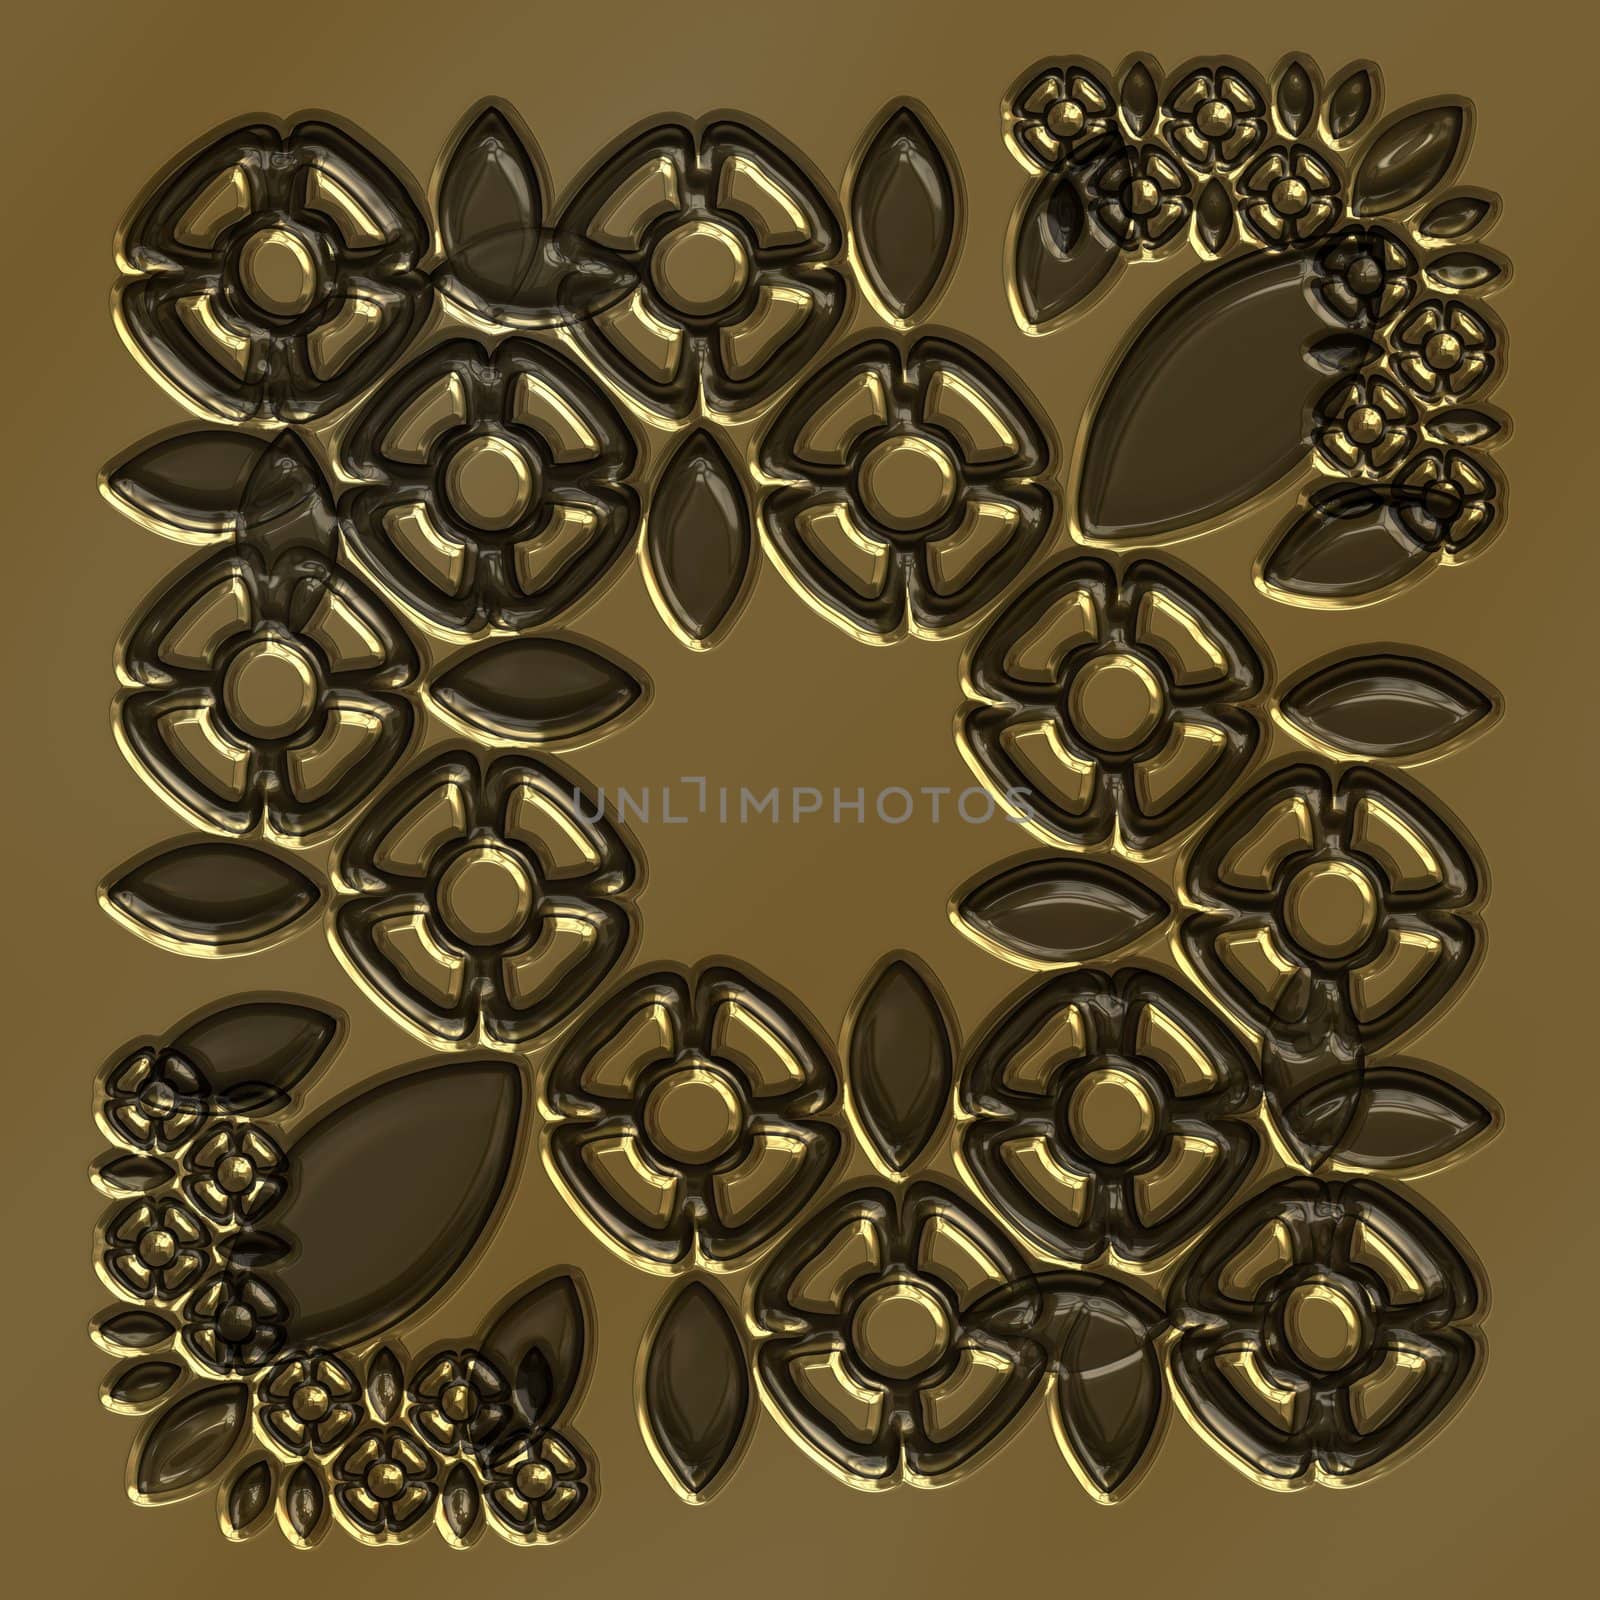 texture of gold to brown abstract flower shapes imprinted